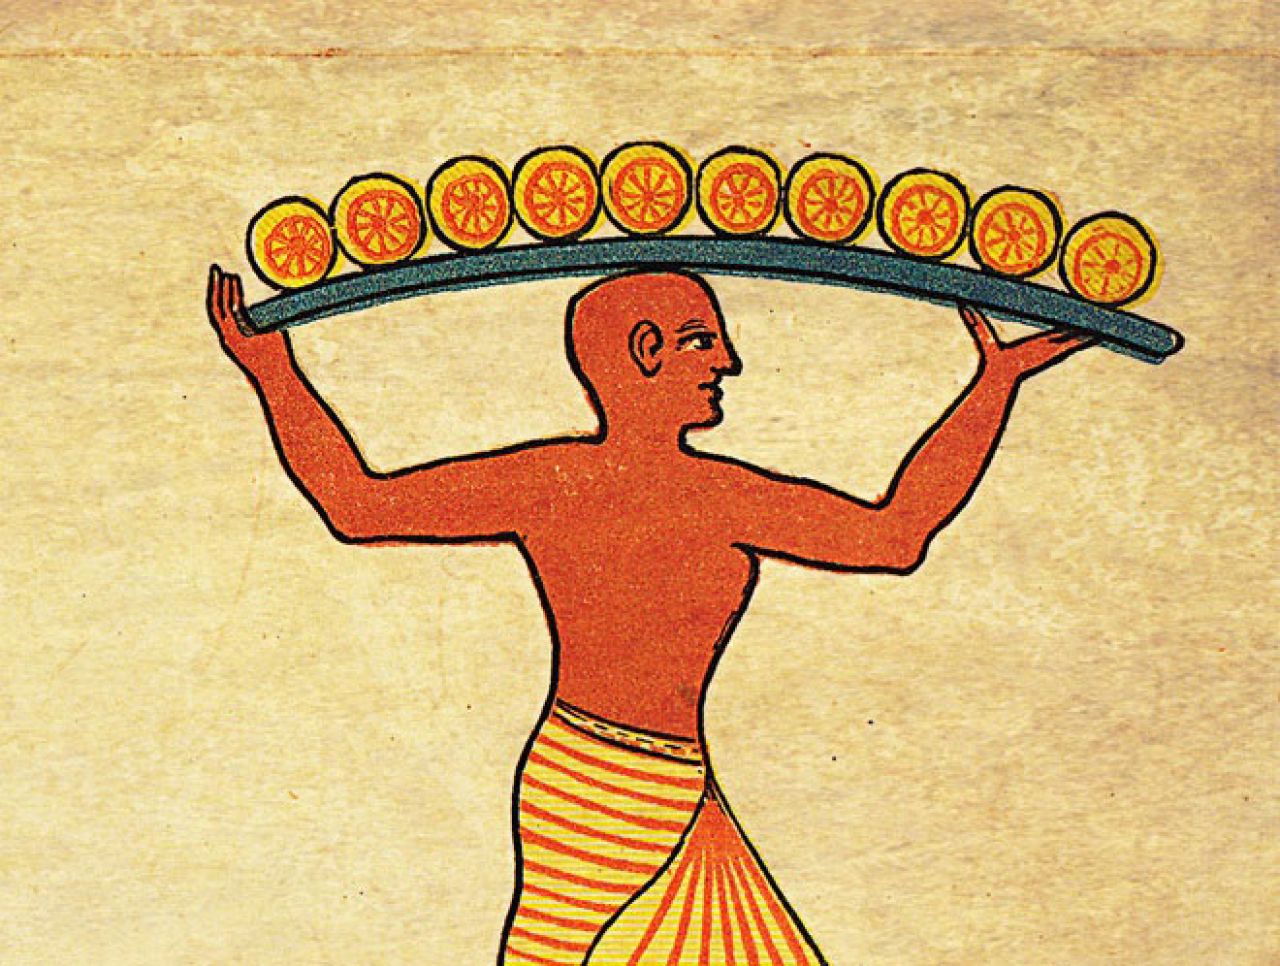 Bread in ancient Egypt